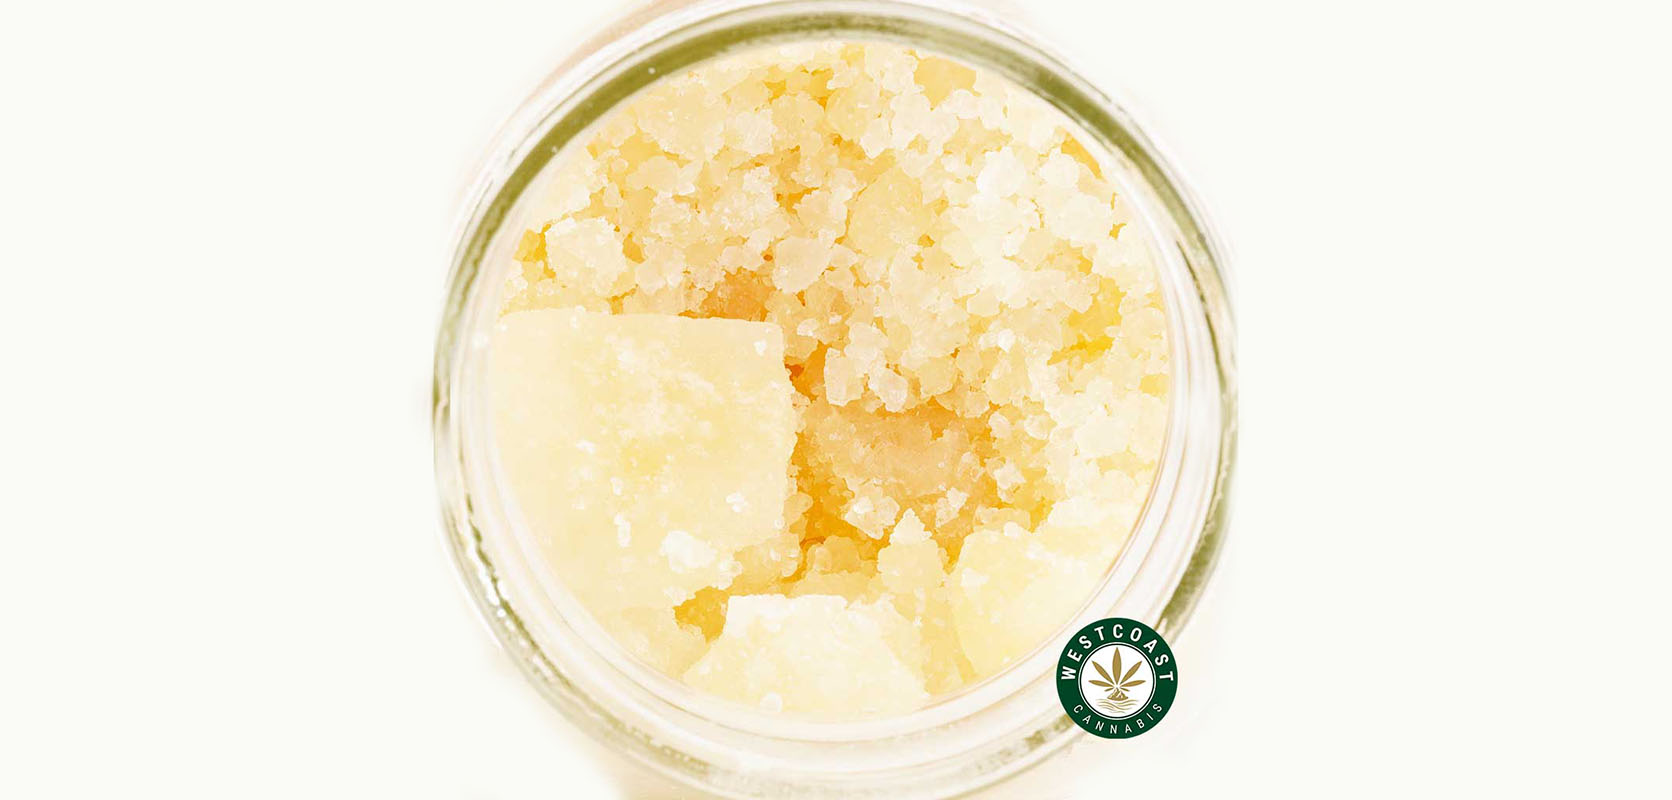 Diamonds Snow Cap Hybrid weed concentrates for sale from online dispensary in Canada for weed online.